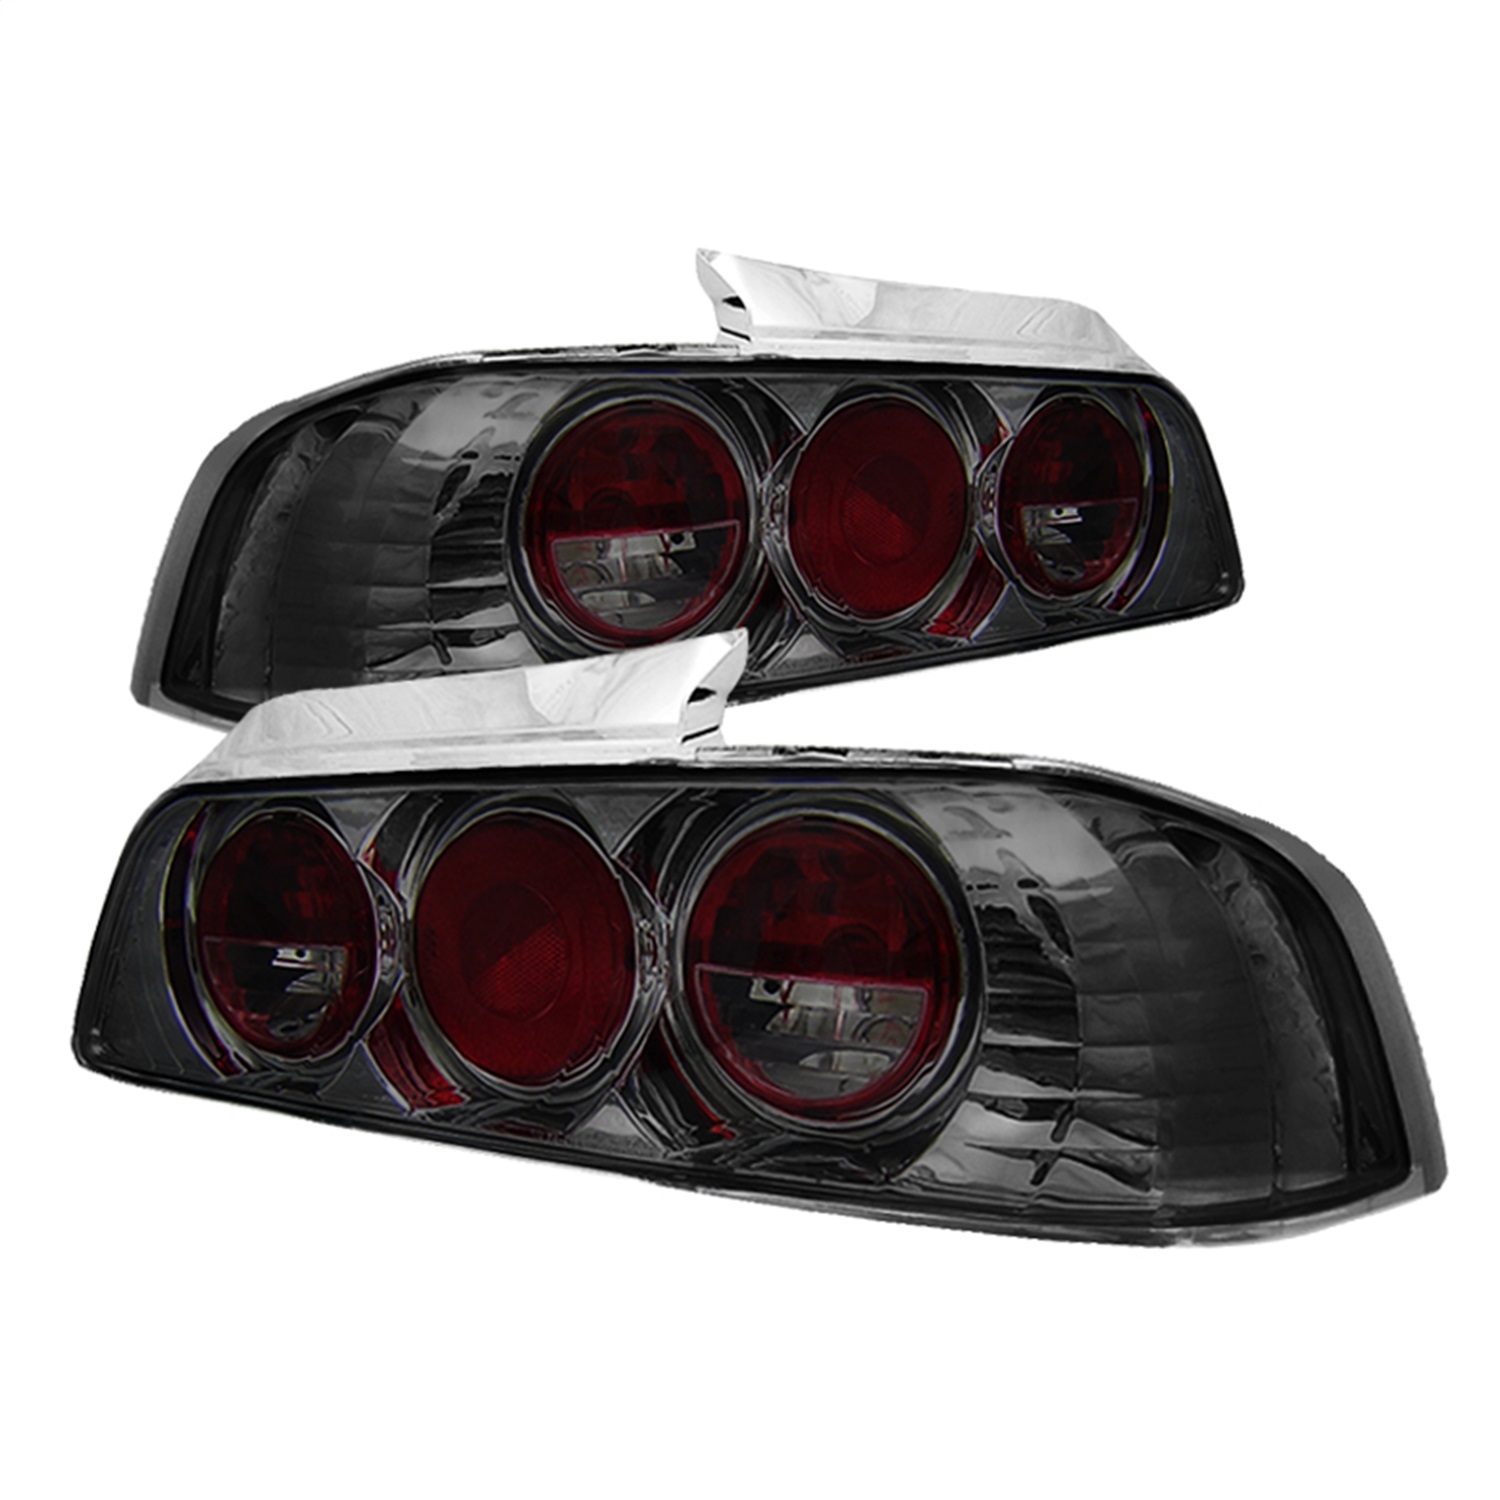 Spyder Auto 5005304 Euro Style Tail Lights Fits 97-01 Prelude